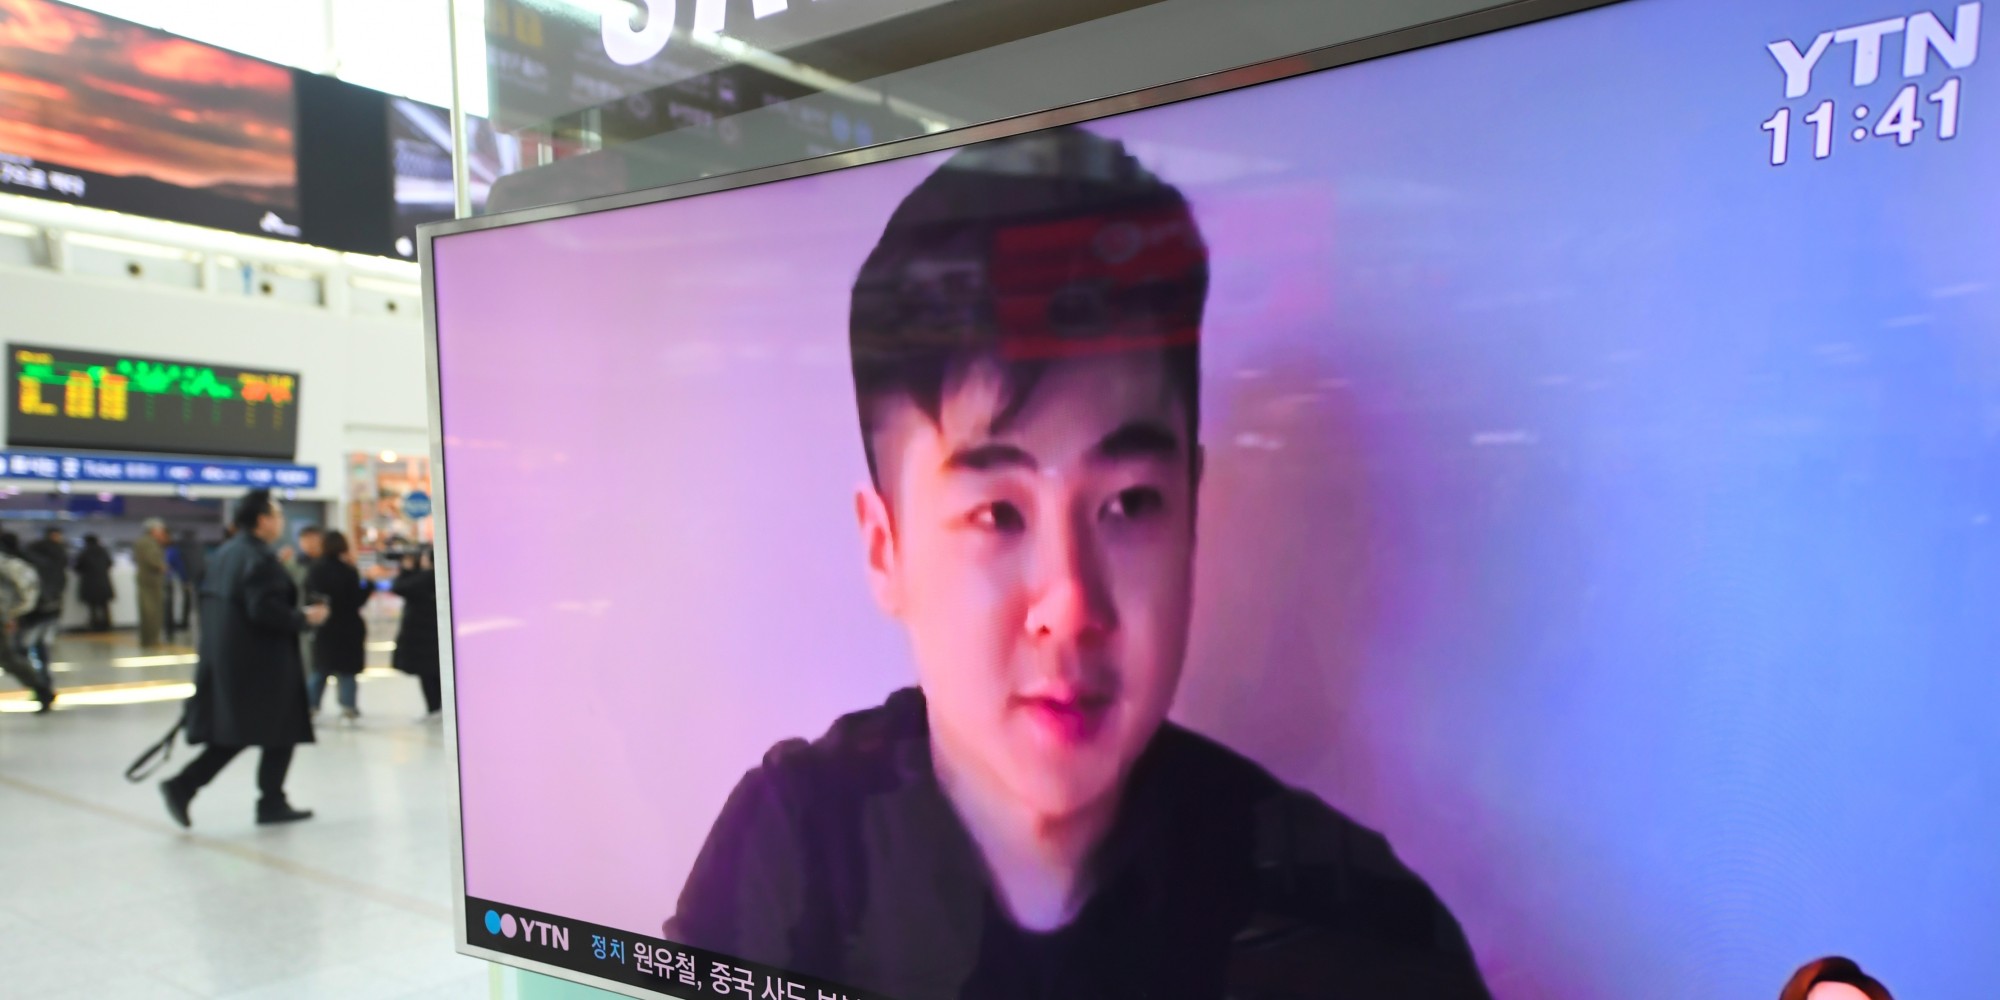 South Koreans watch a television news showing a video footage of a man who claims he is Kim Han-Sol, a nephew of North Korea's leader Kim Jong-Un, at a railway station in Seoul on March 8, 2017.
The video of a man describing himself as the son of assassinated North Korean exile Kim Jong-Nam emerged on March 8, apparently the first time a family member has spoken about the killing. / AFP PHOTO / JUNG Yeon-Je        (Photo credit should read JUNG YEON-JE/AFP/Getty Images)